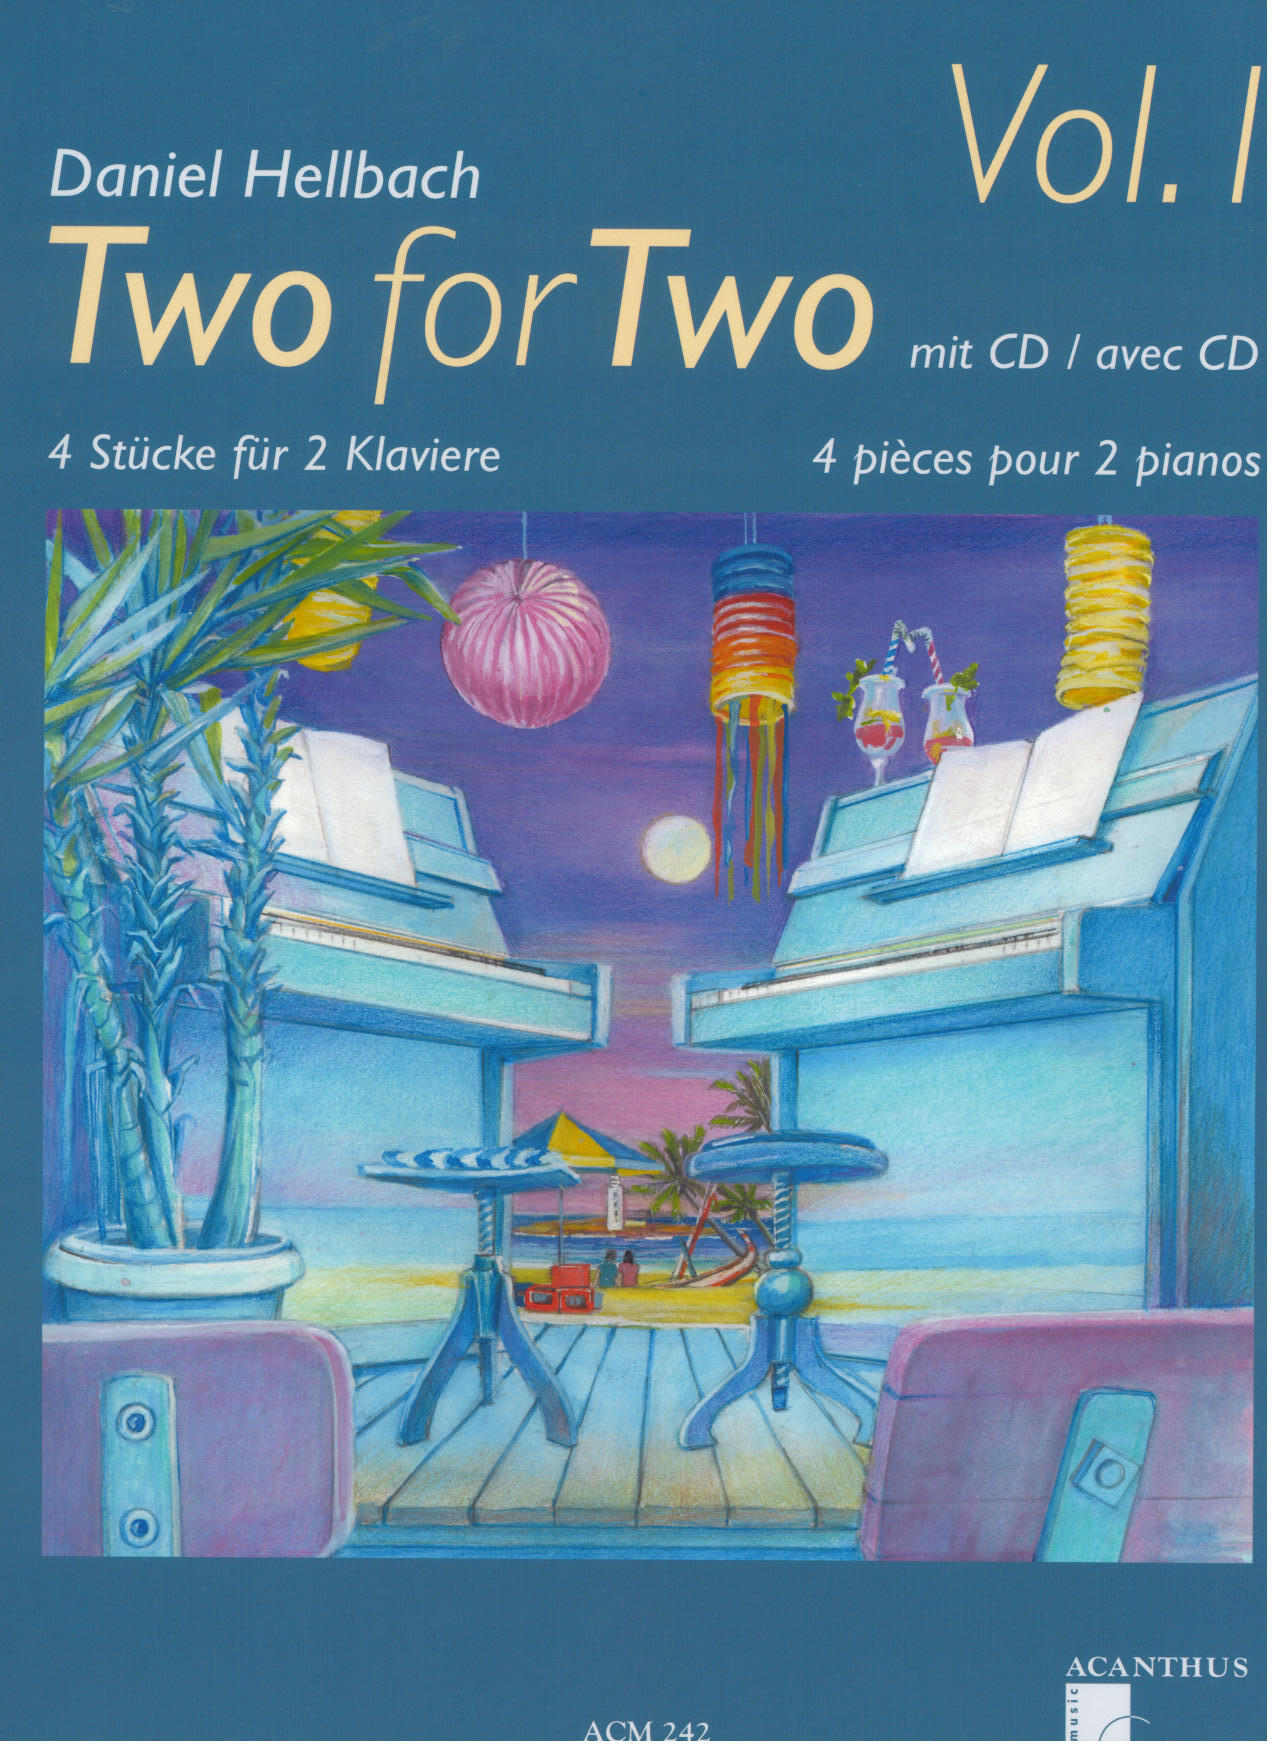 Two for two vol. 1 : photo 1